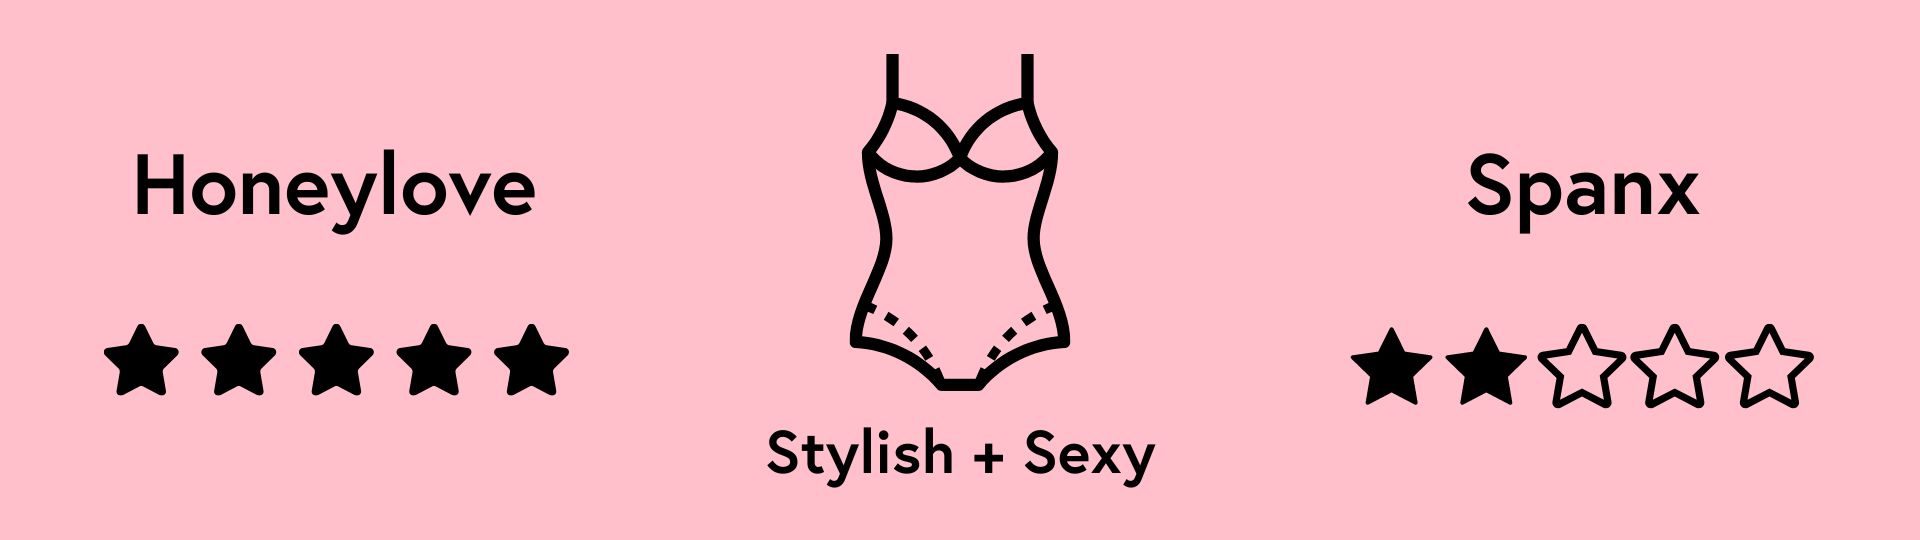 Honeylove shapewear vs Spanx, any opinions / other recommendations